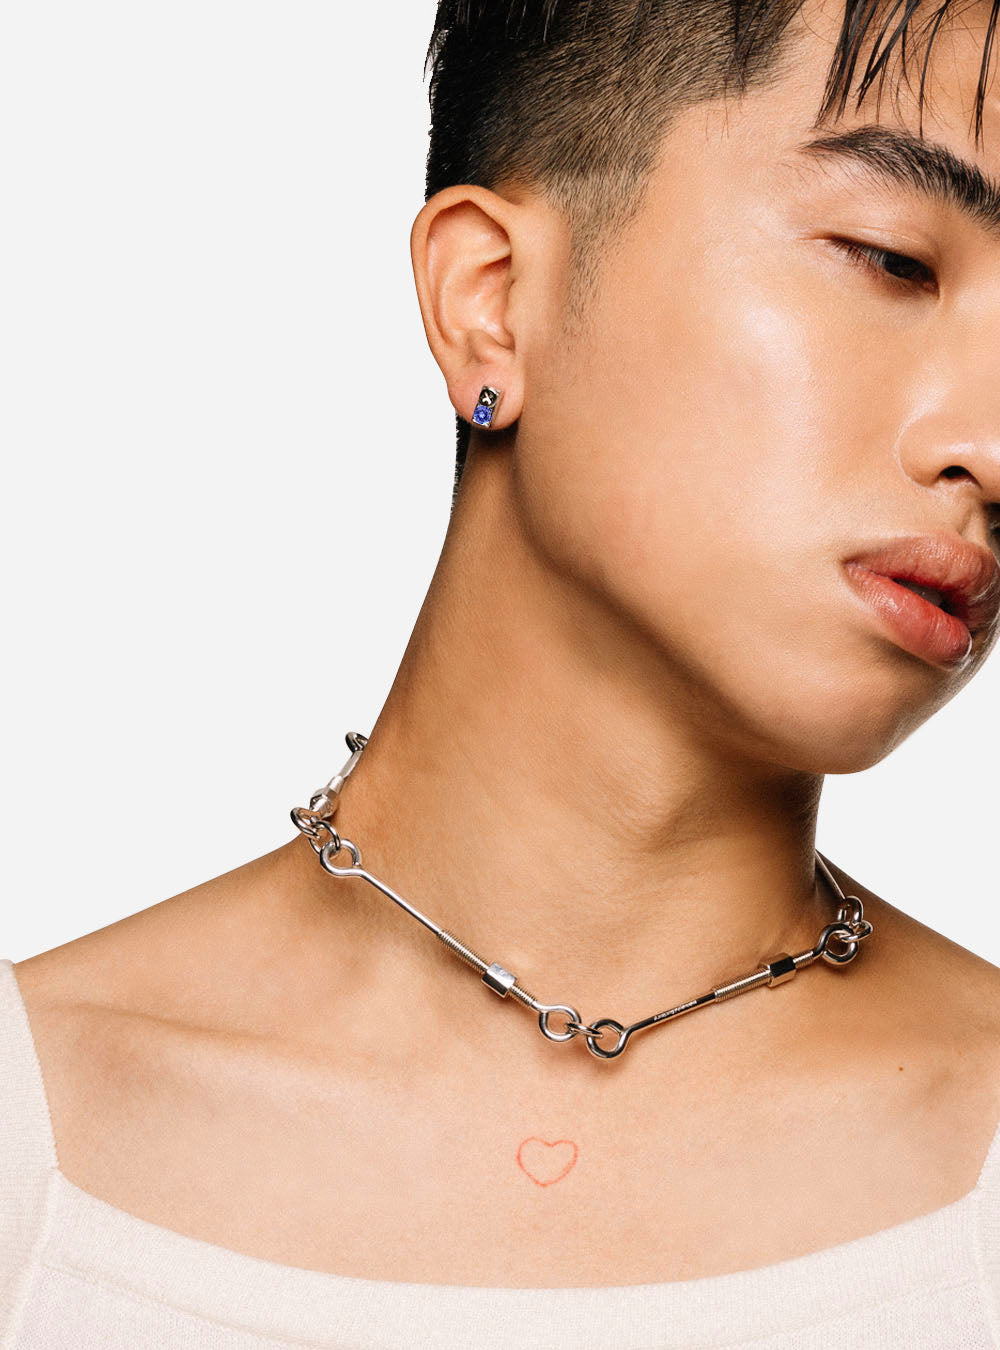 A young man wearing a MIDNIGHTFACTORY necklace with a heart on it.